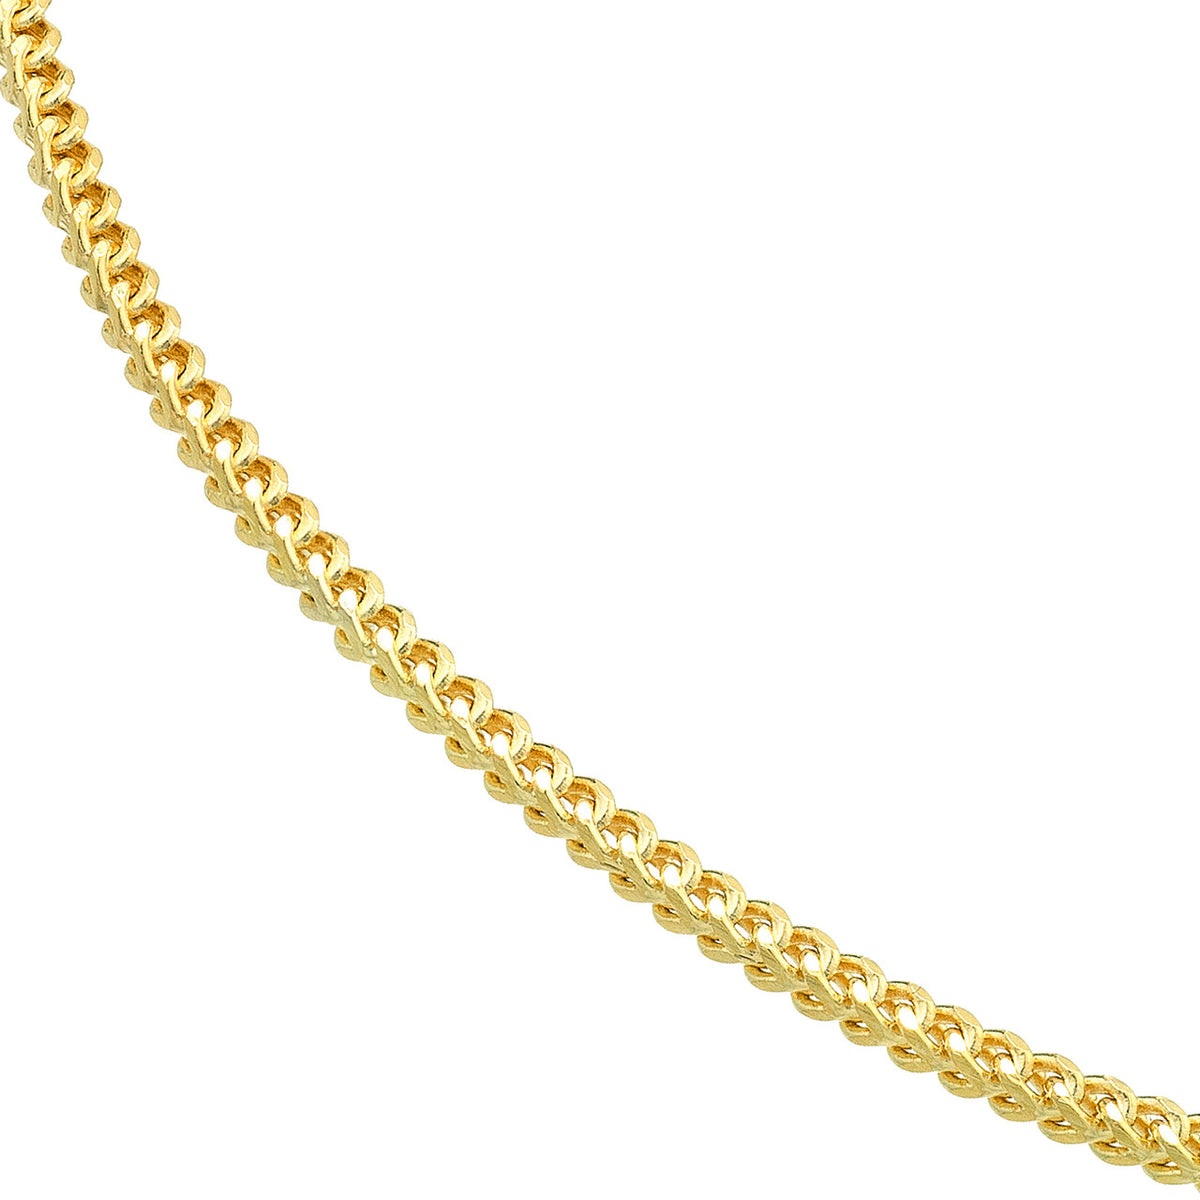 14K Yellow Gold or White Gold 1.9mm Franco Chain Necklace with Lobster Lock